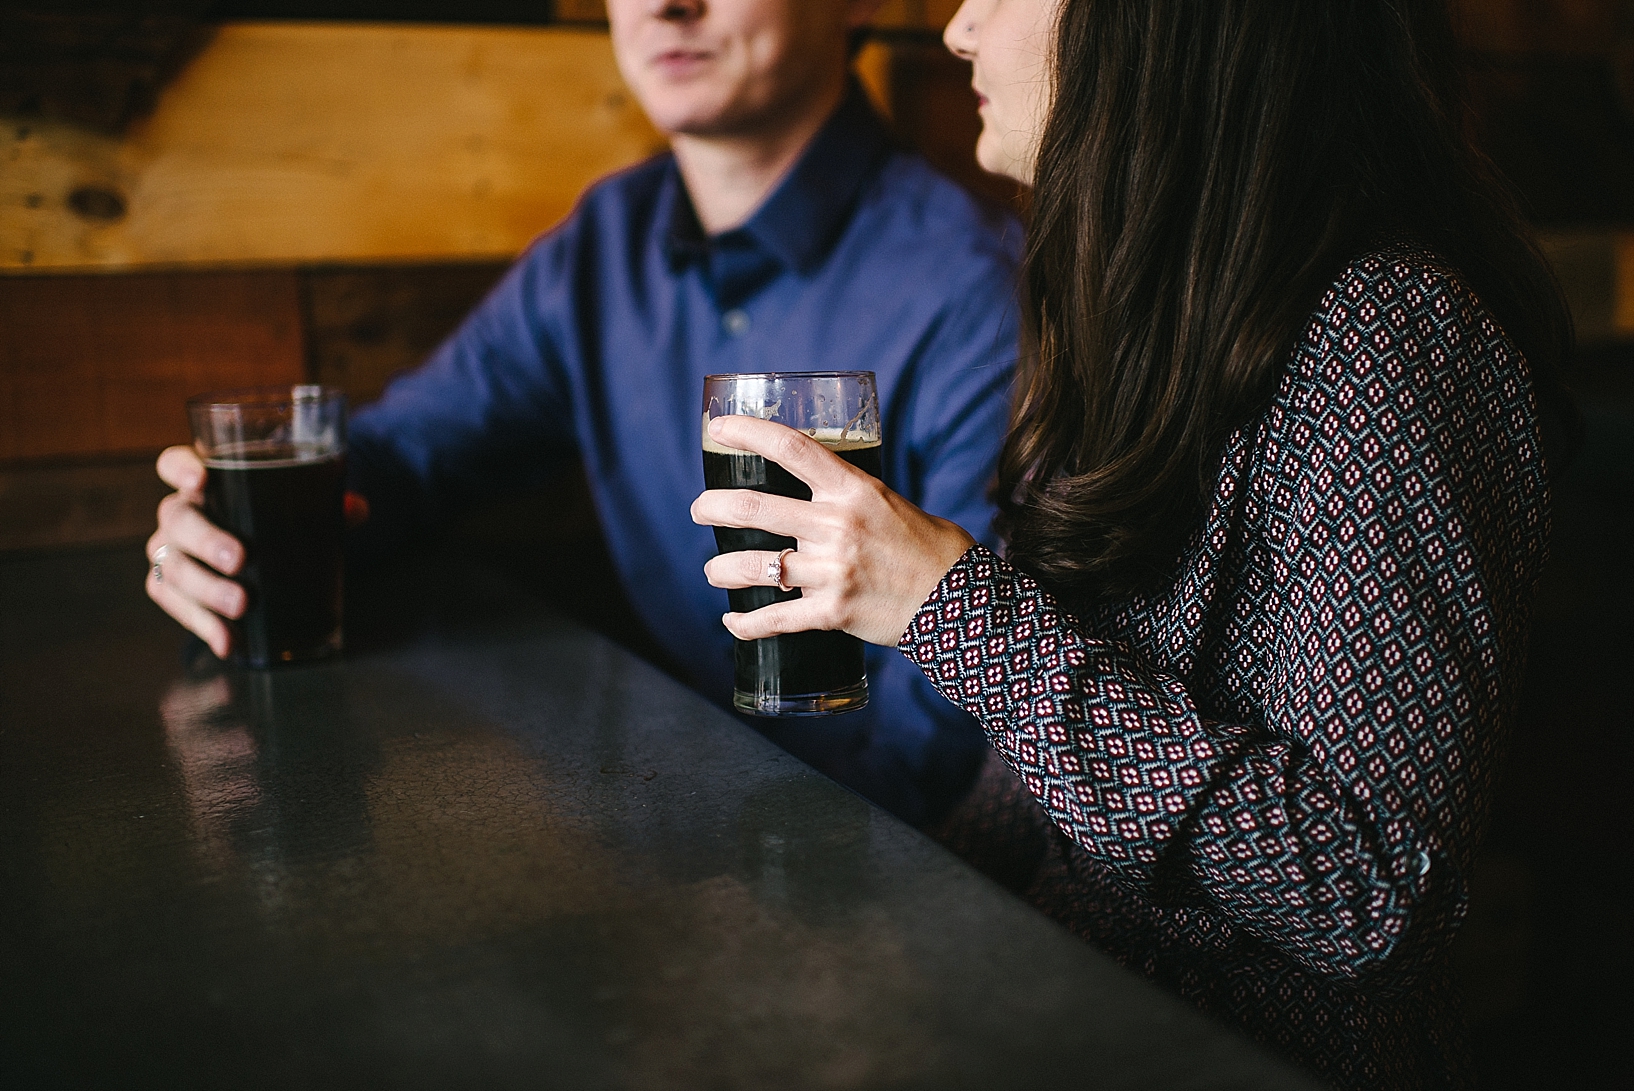 woman's hand wearing diamond engagement ring holding craft beer sitting next to fiance in blue shirt